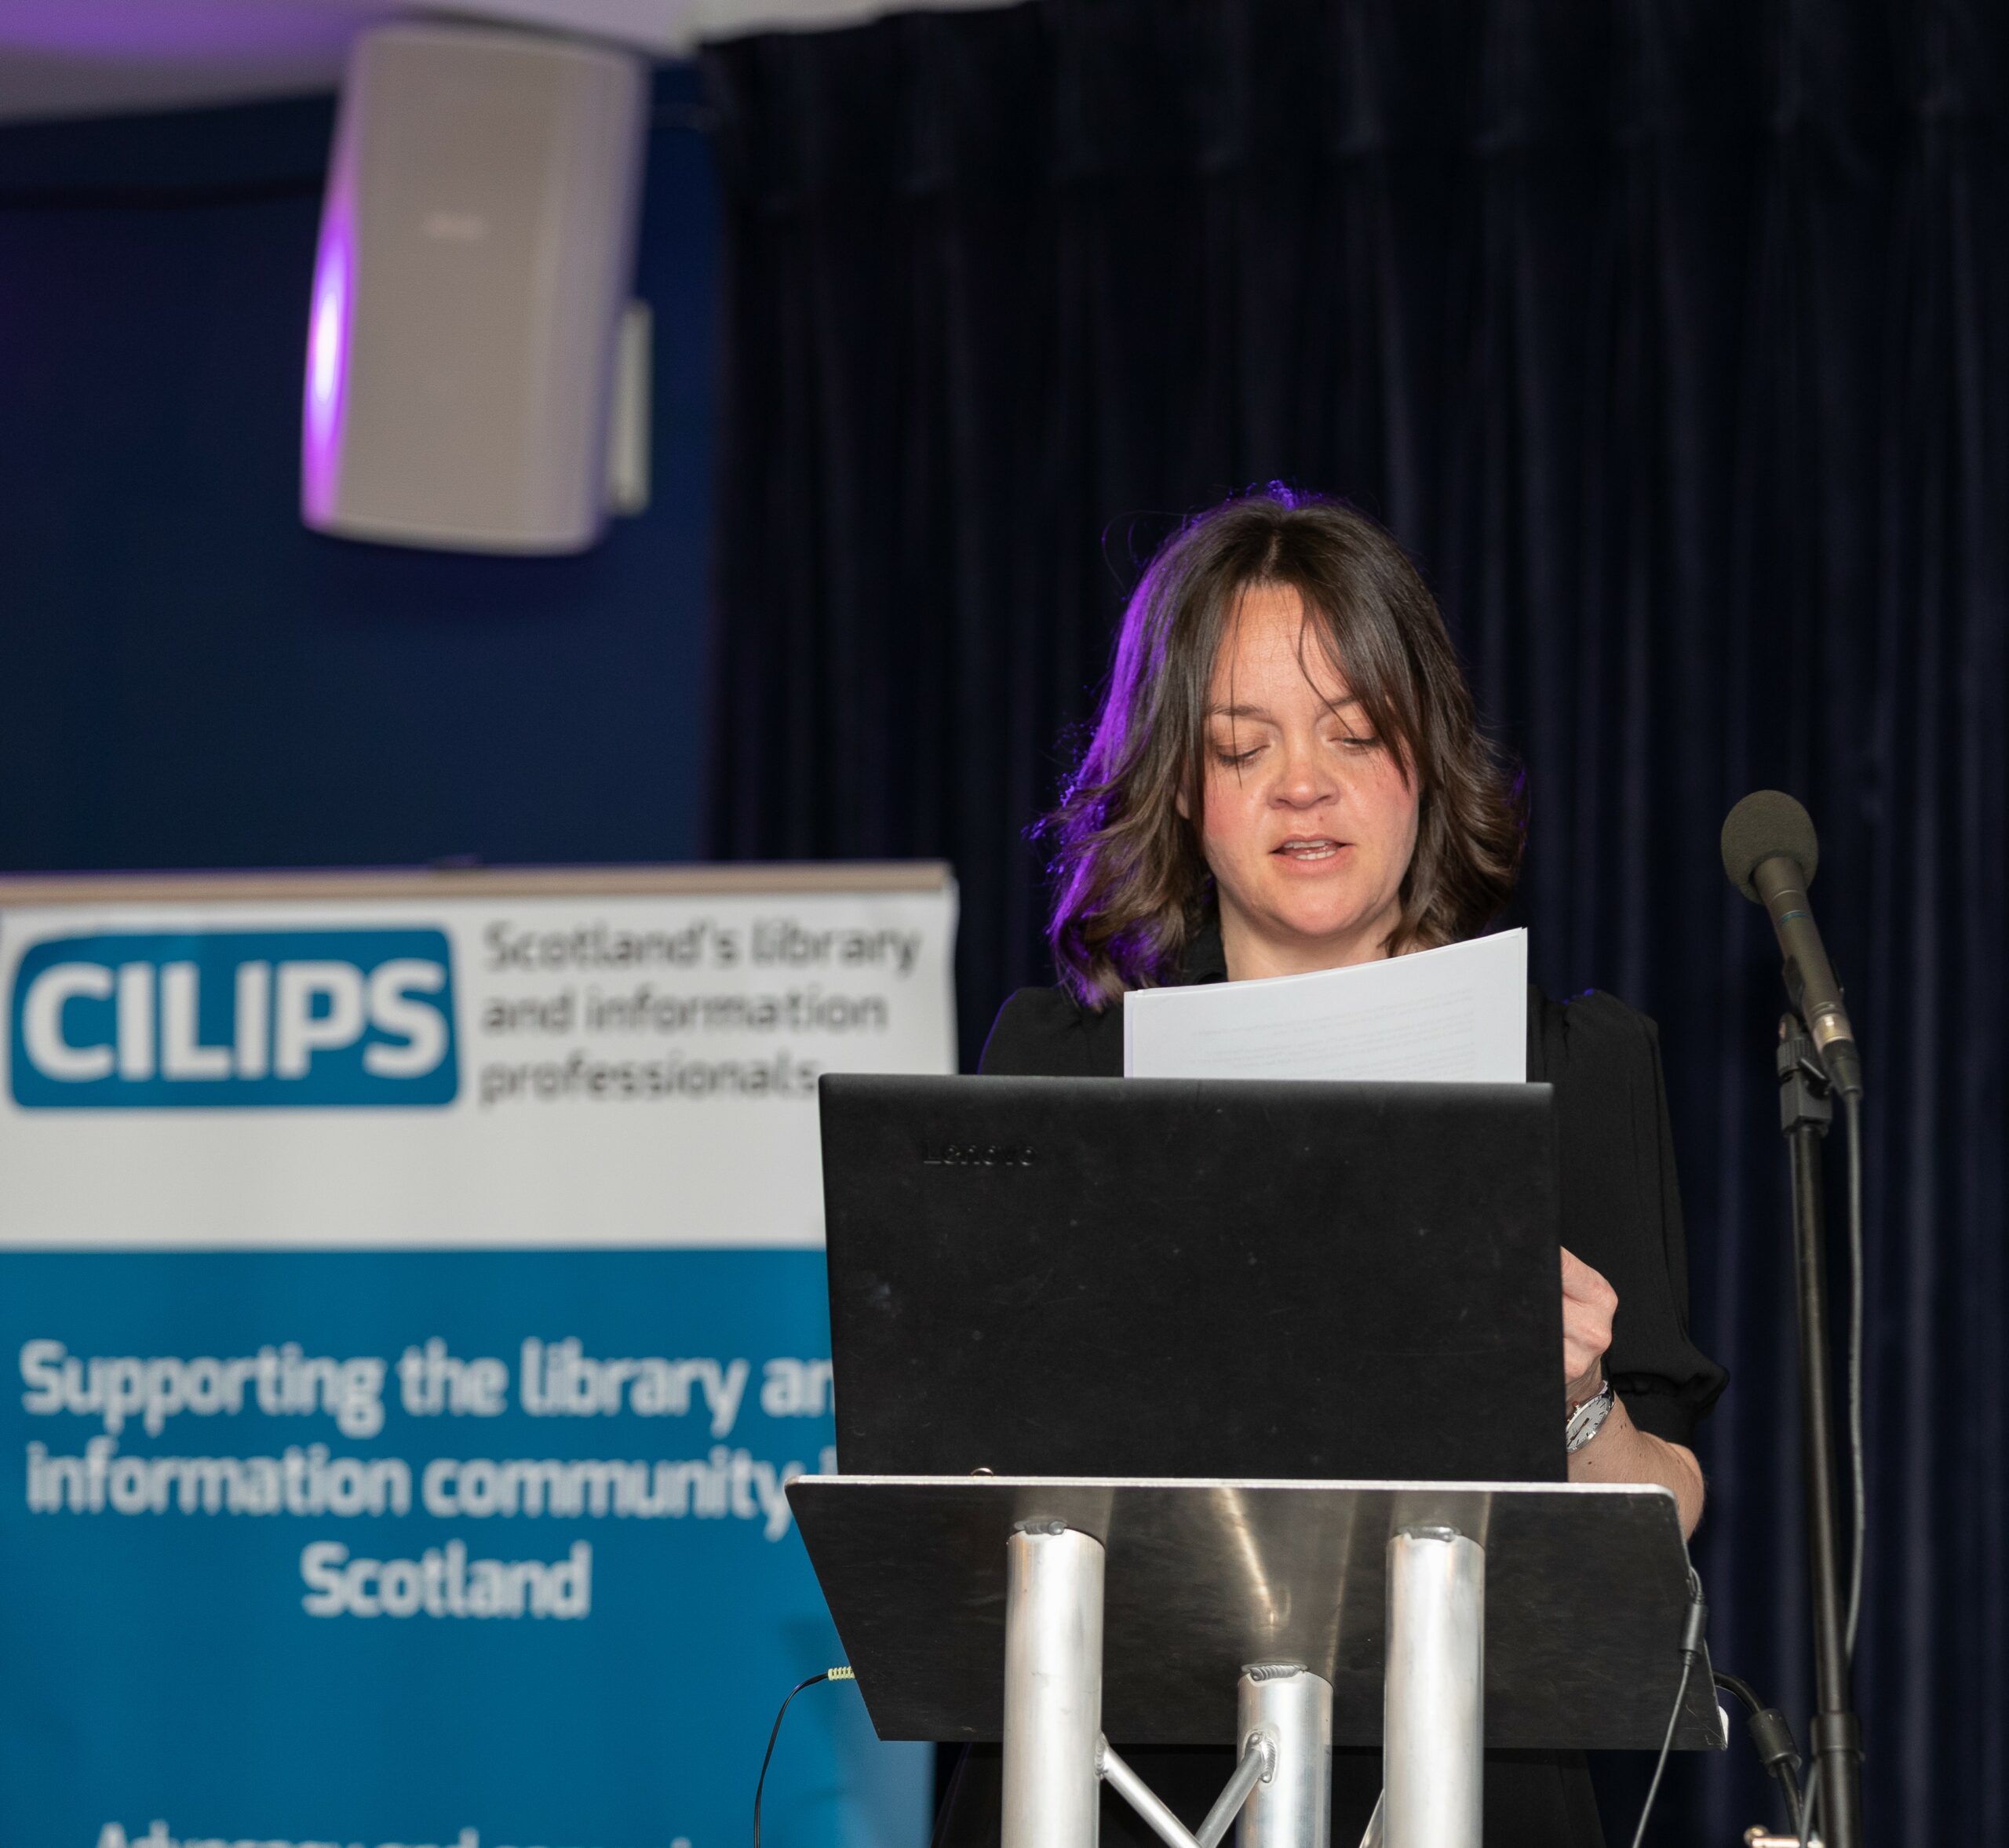 Scotland on Sunday editor and CILIPS Honorary Member Catherine Salmond addresses CILIPS22 delegates with a CILIPS banner behind her.